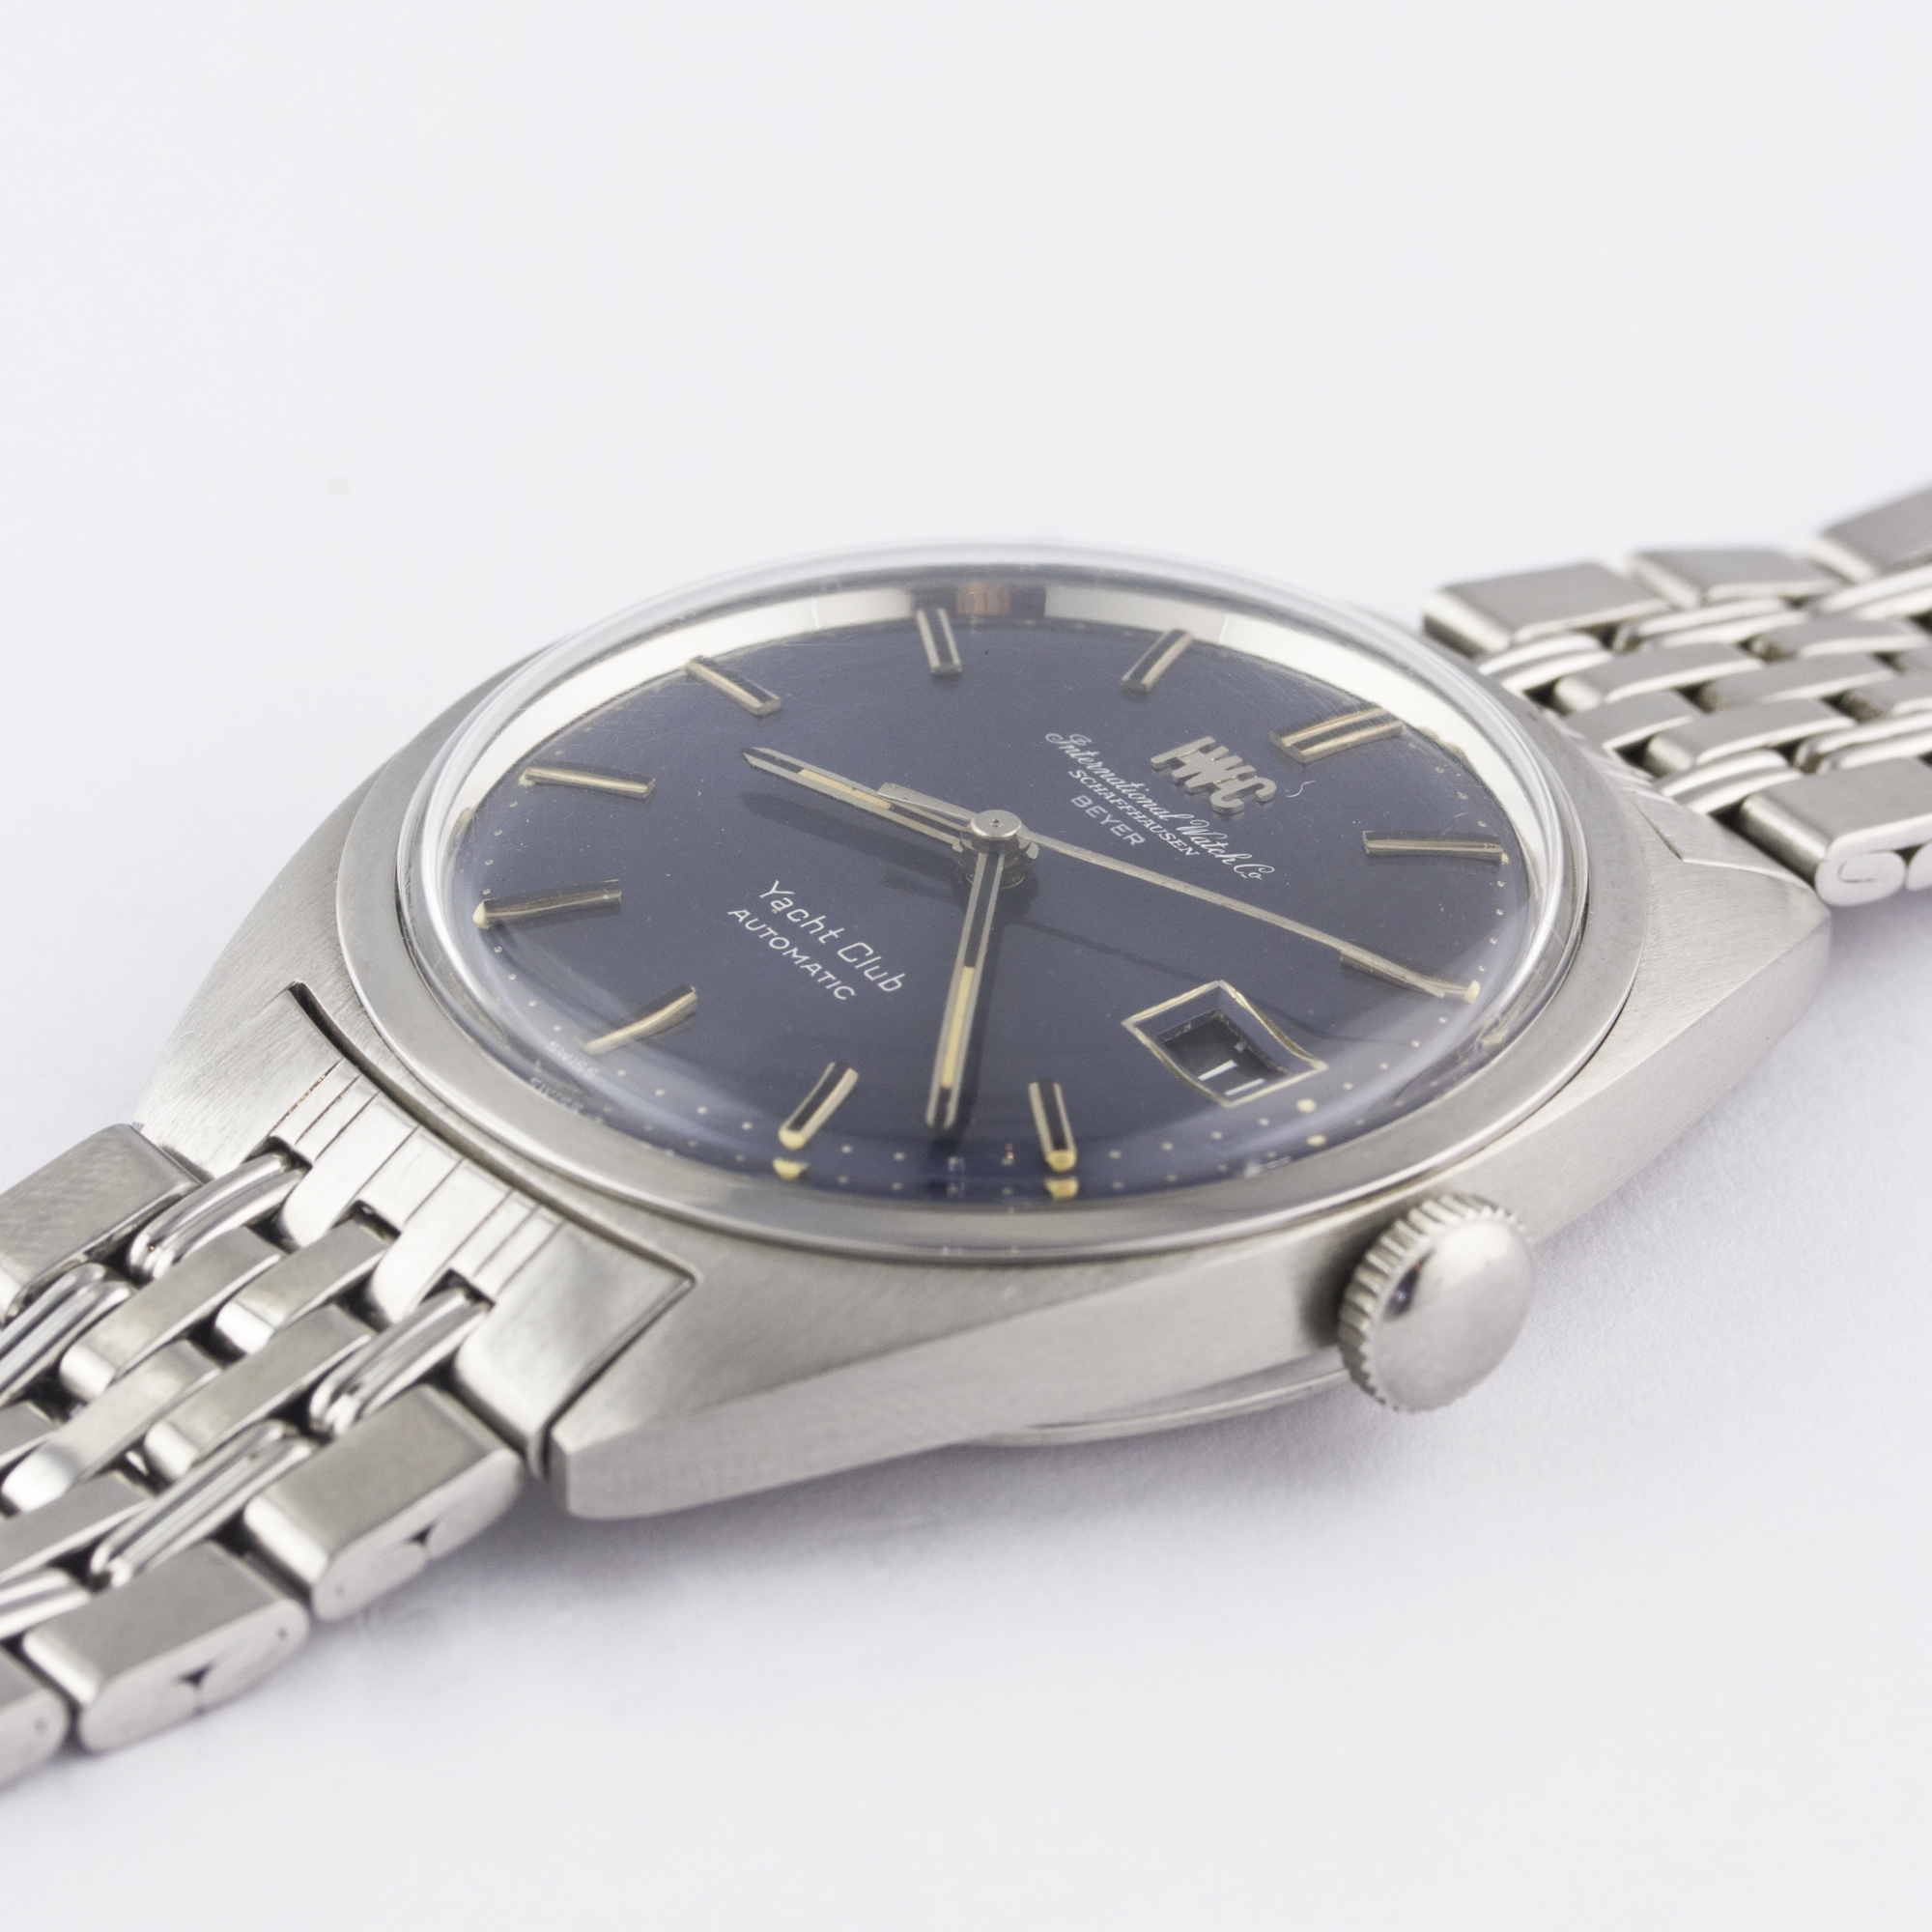 A RARE GENTLEMAN'S STAINLESS STEEL IWC YACHT CLUB AUTOMATIC BRACELET WATCH CIRCA 1971, REF. R811 - Image 3 of 11